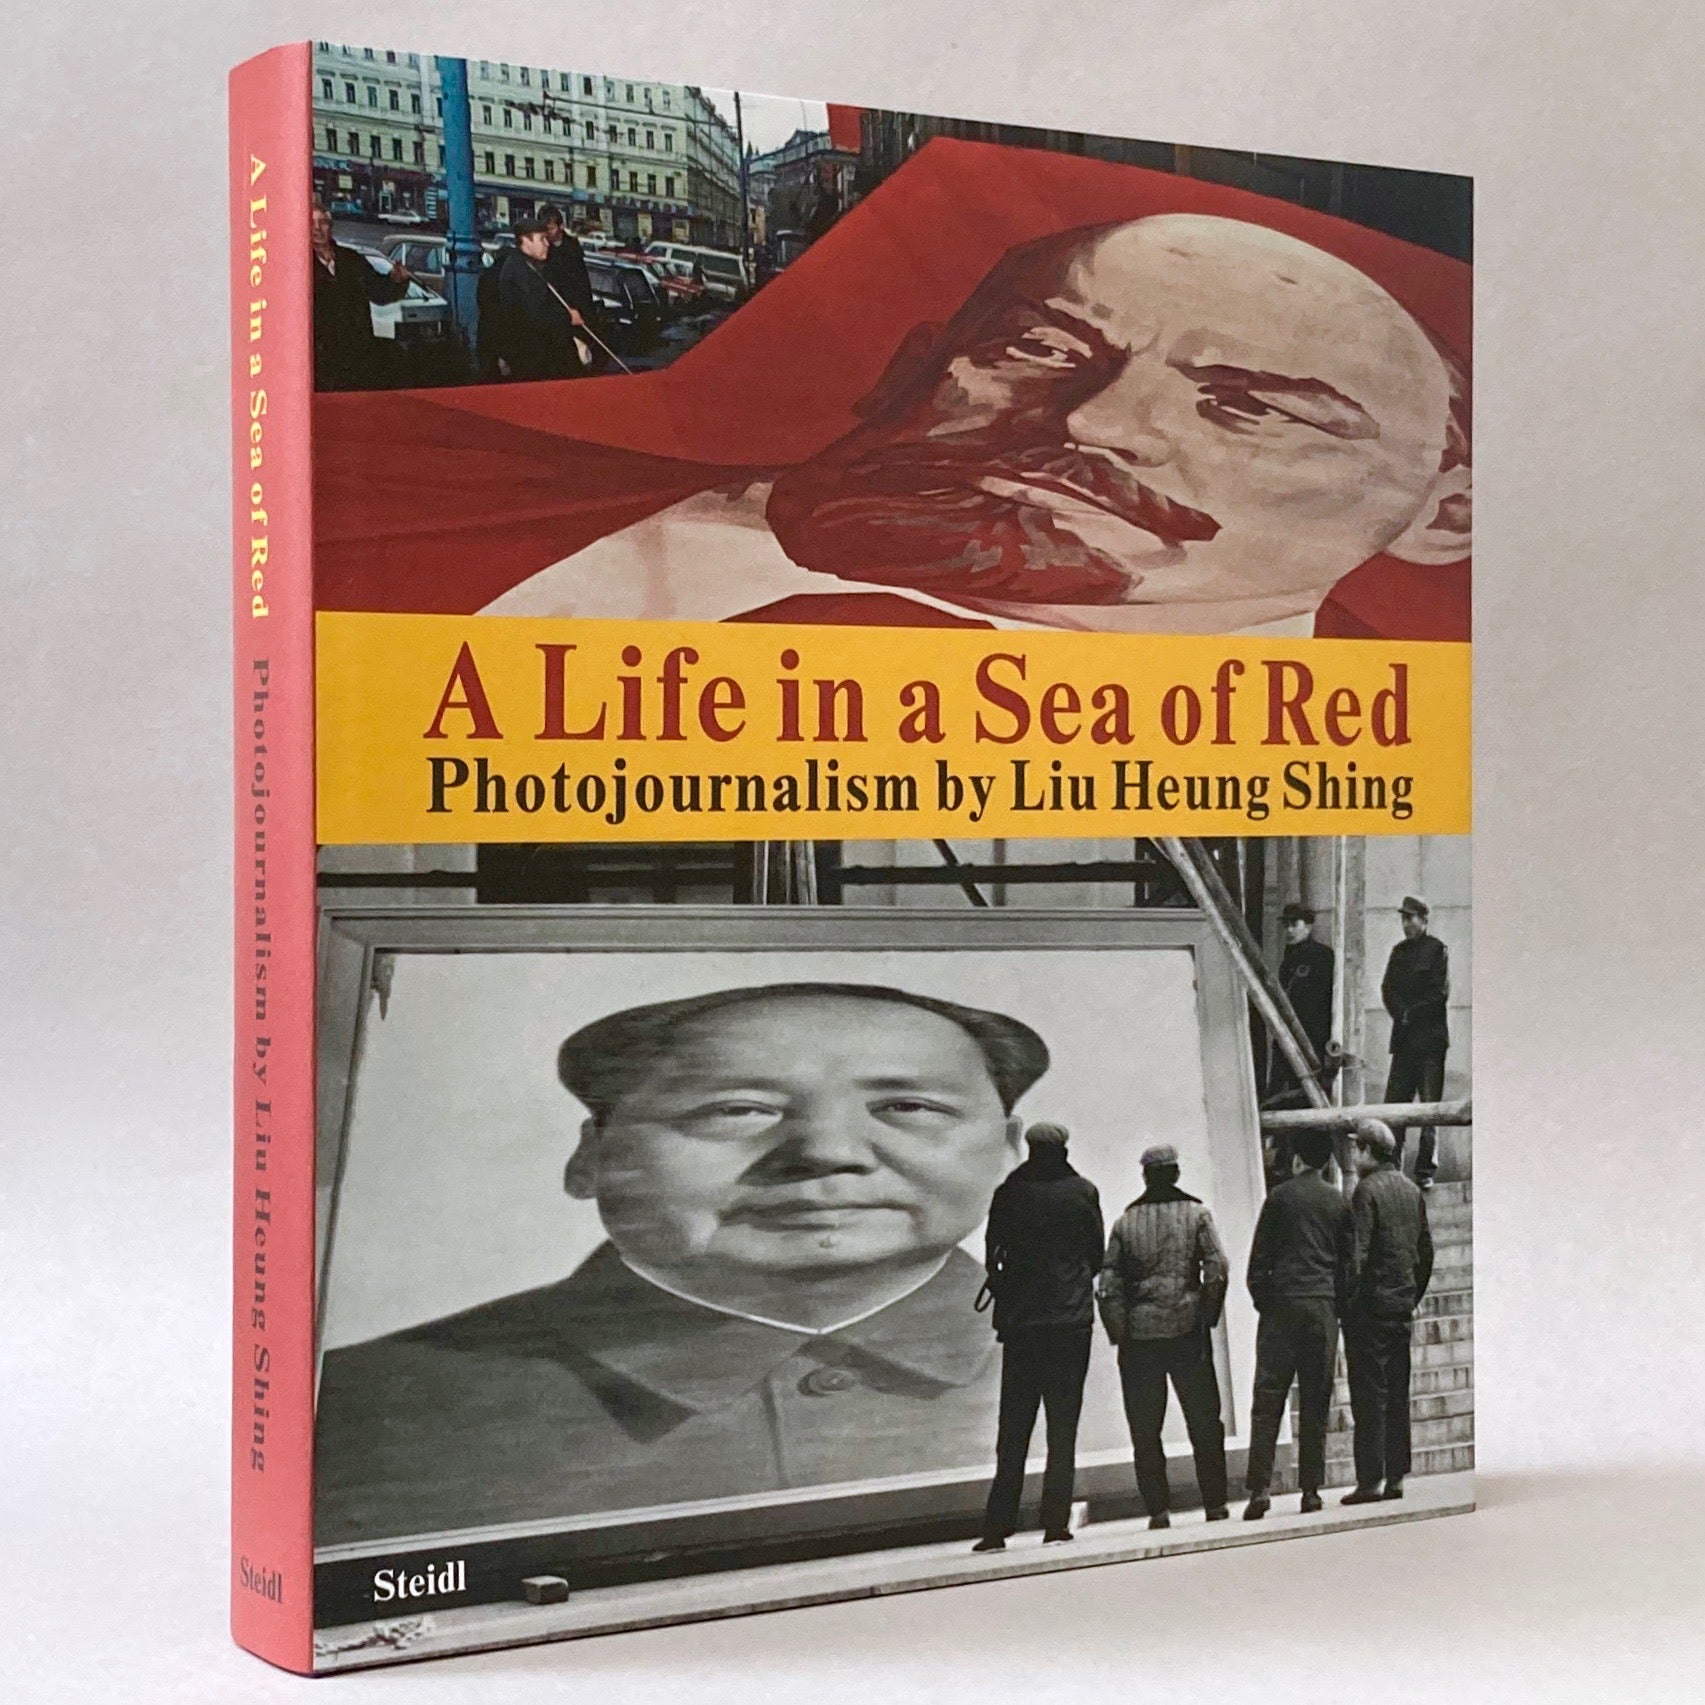 A Life in a Sea of Red: Photojournalism by Liu Heung Shing